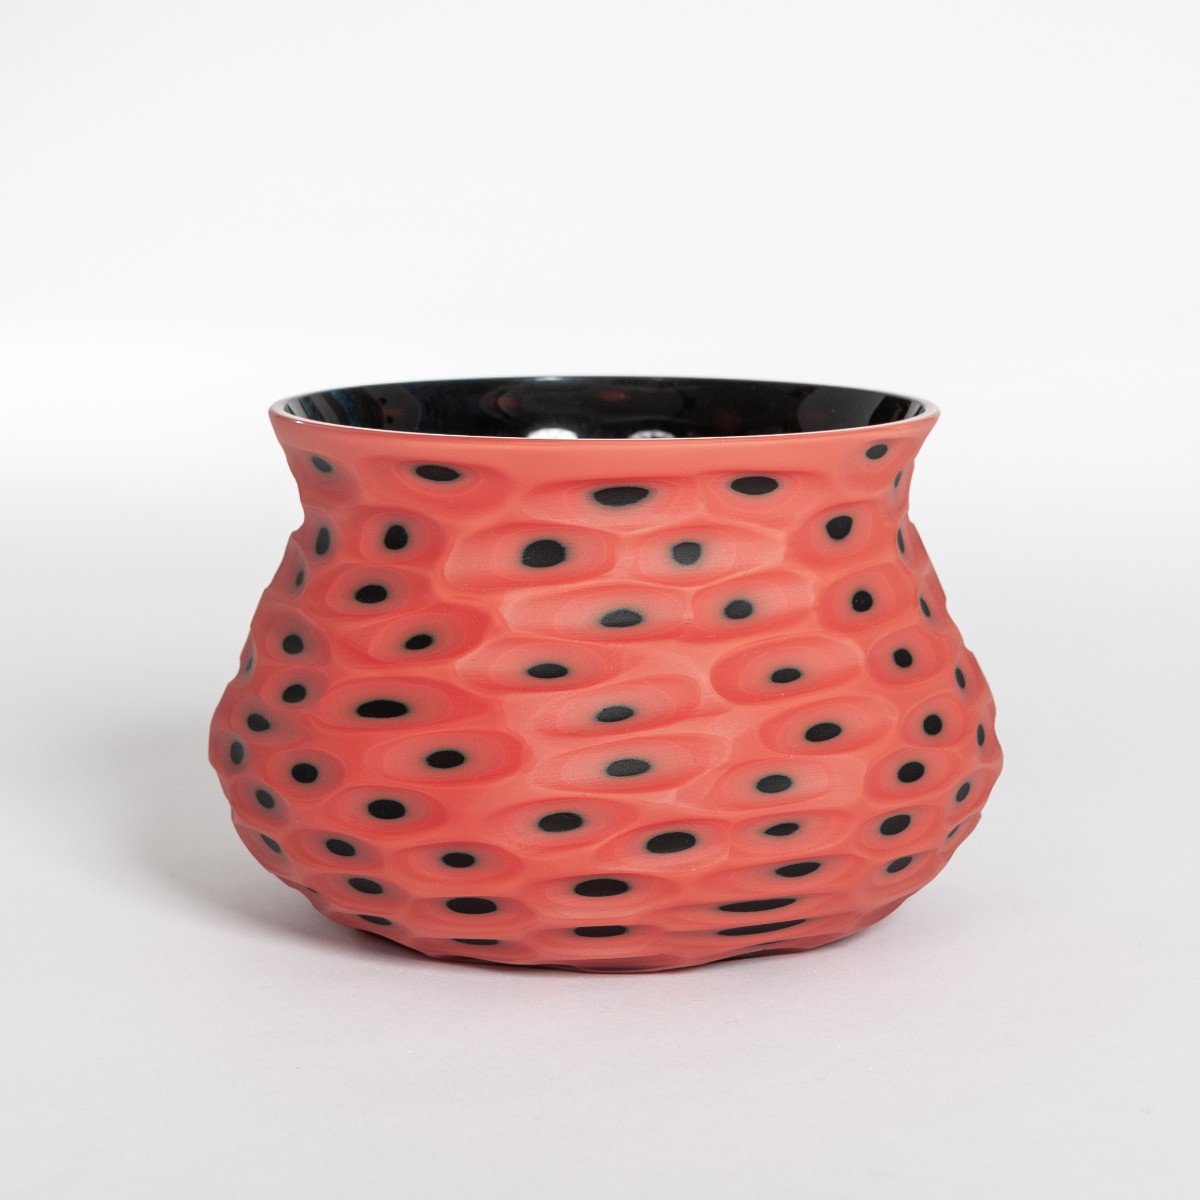 Pair Of Very Decorative Murano Glass Bowls In The Colors Coral-black With Matt Surface And Battuto Decor By Afro Celotto-photo-1